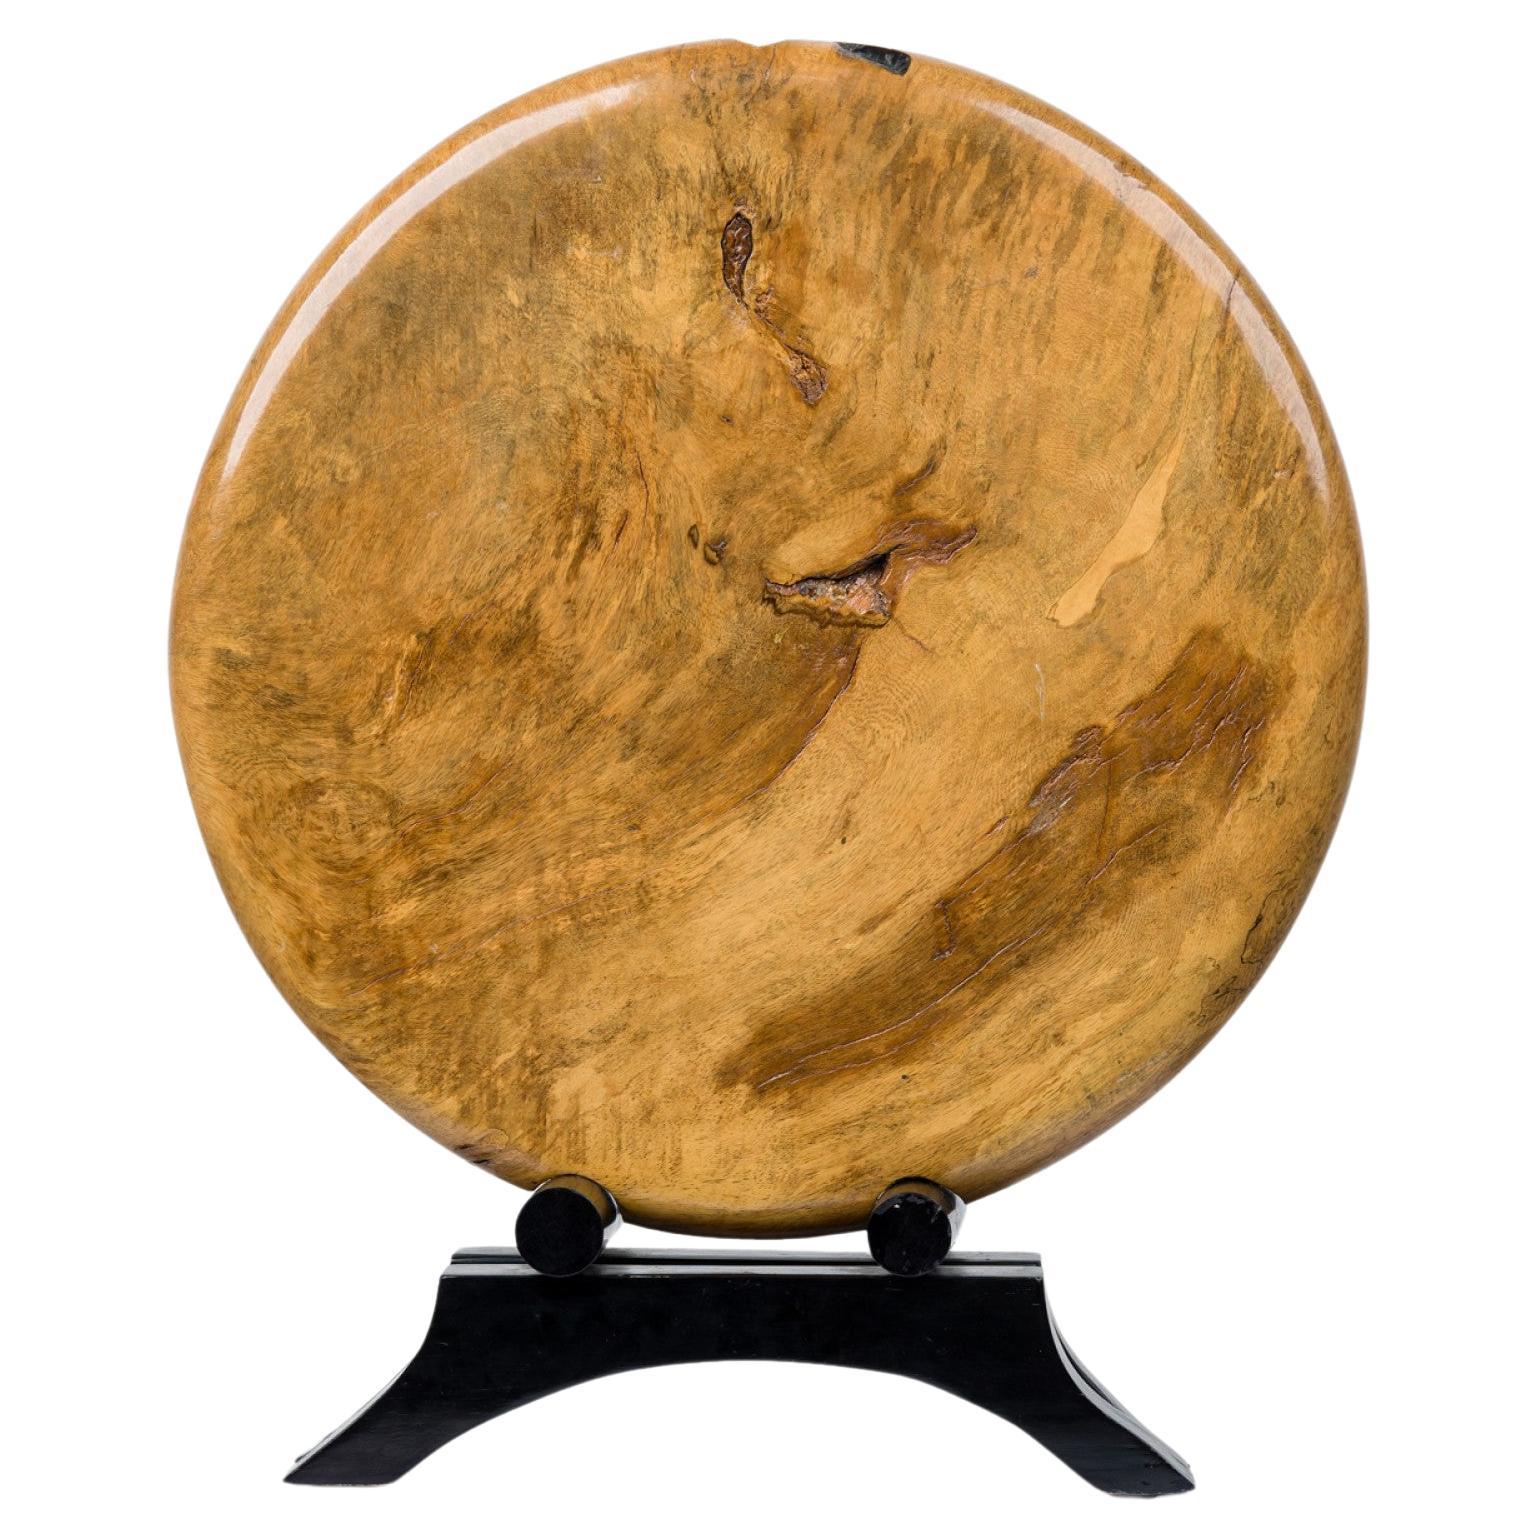 Contemporary American Modern Circular Wood Sculpture on Stand